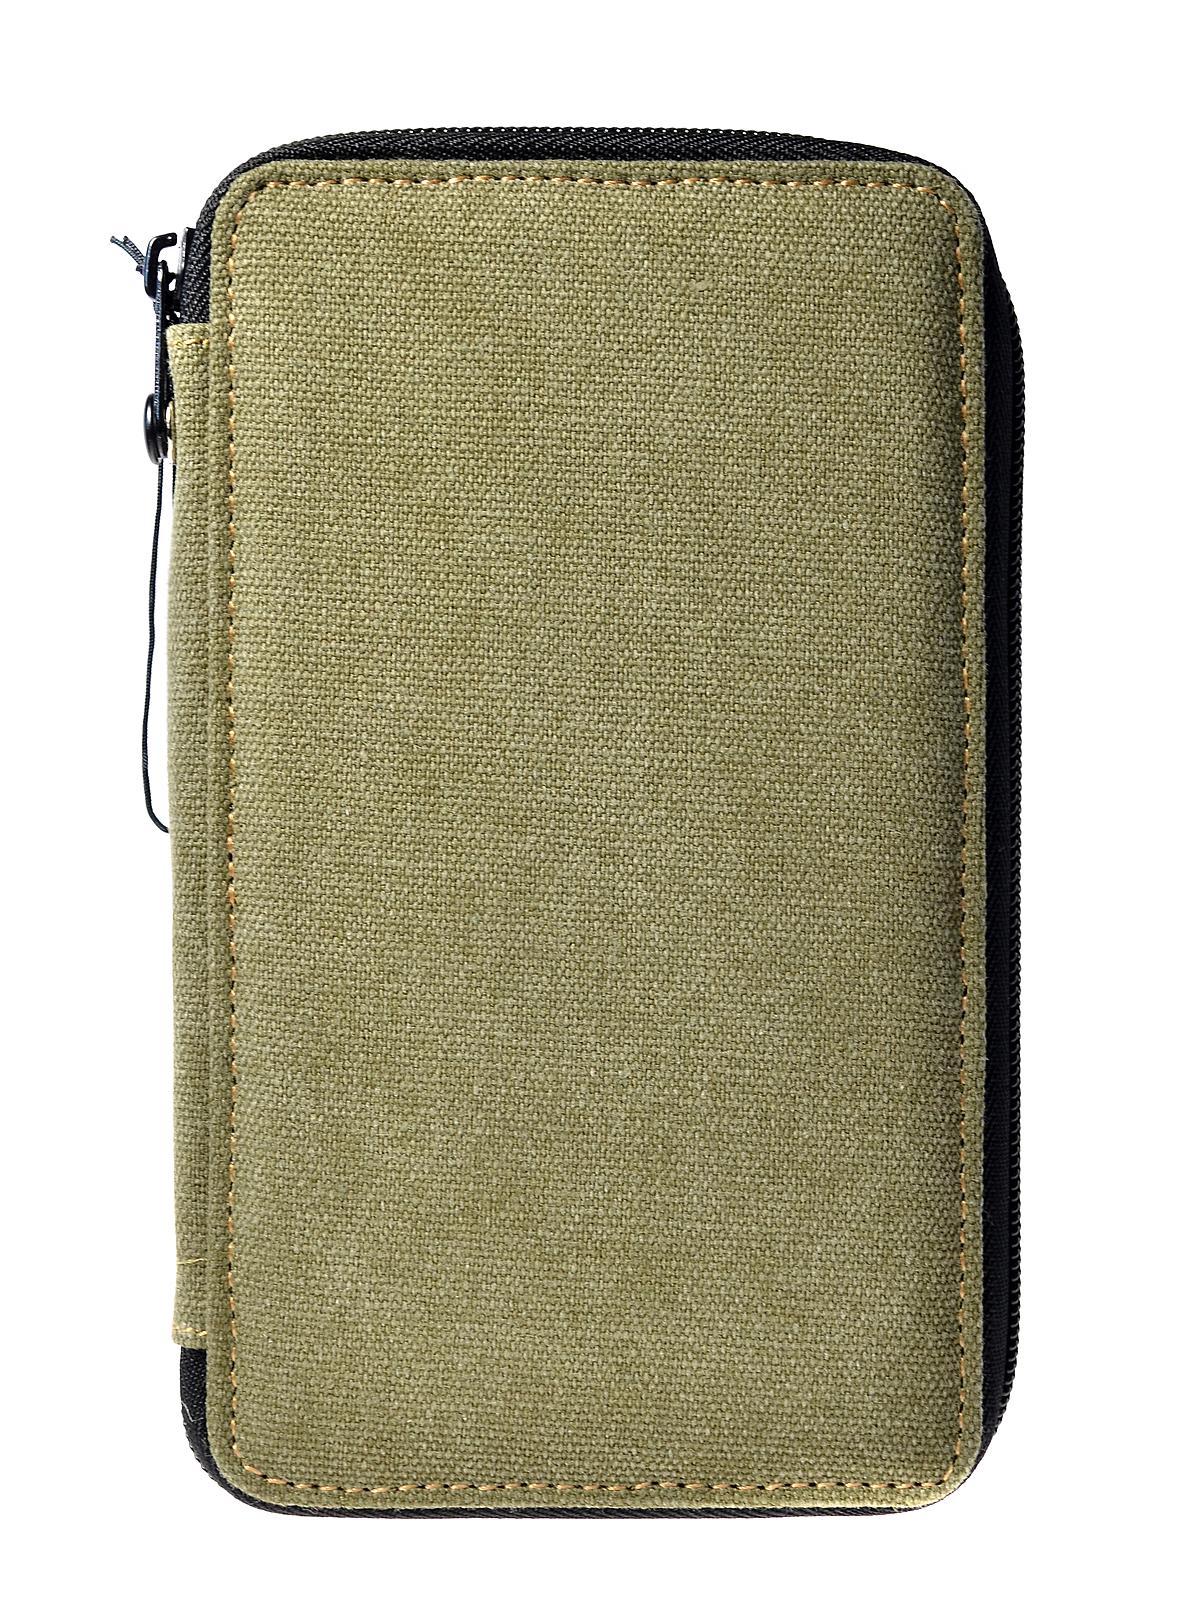 Canvas Pencil Cases Olive Holds 24 Pencils